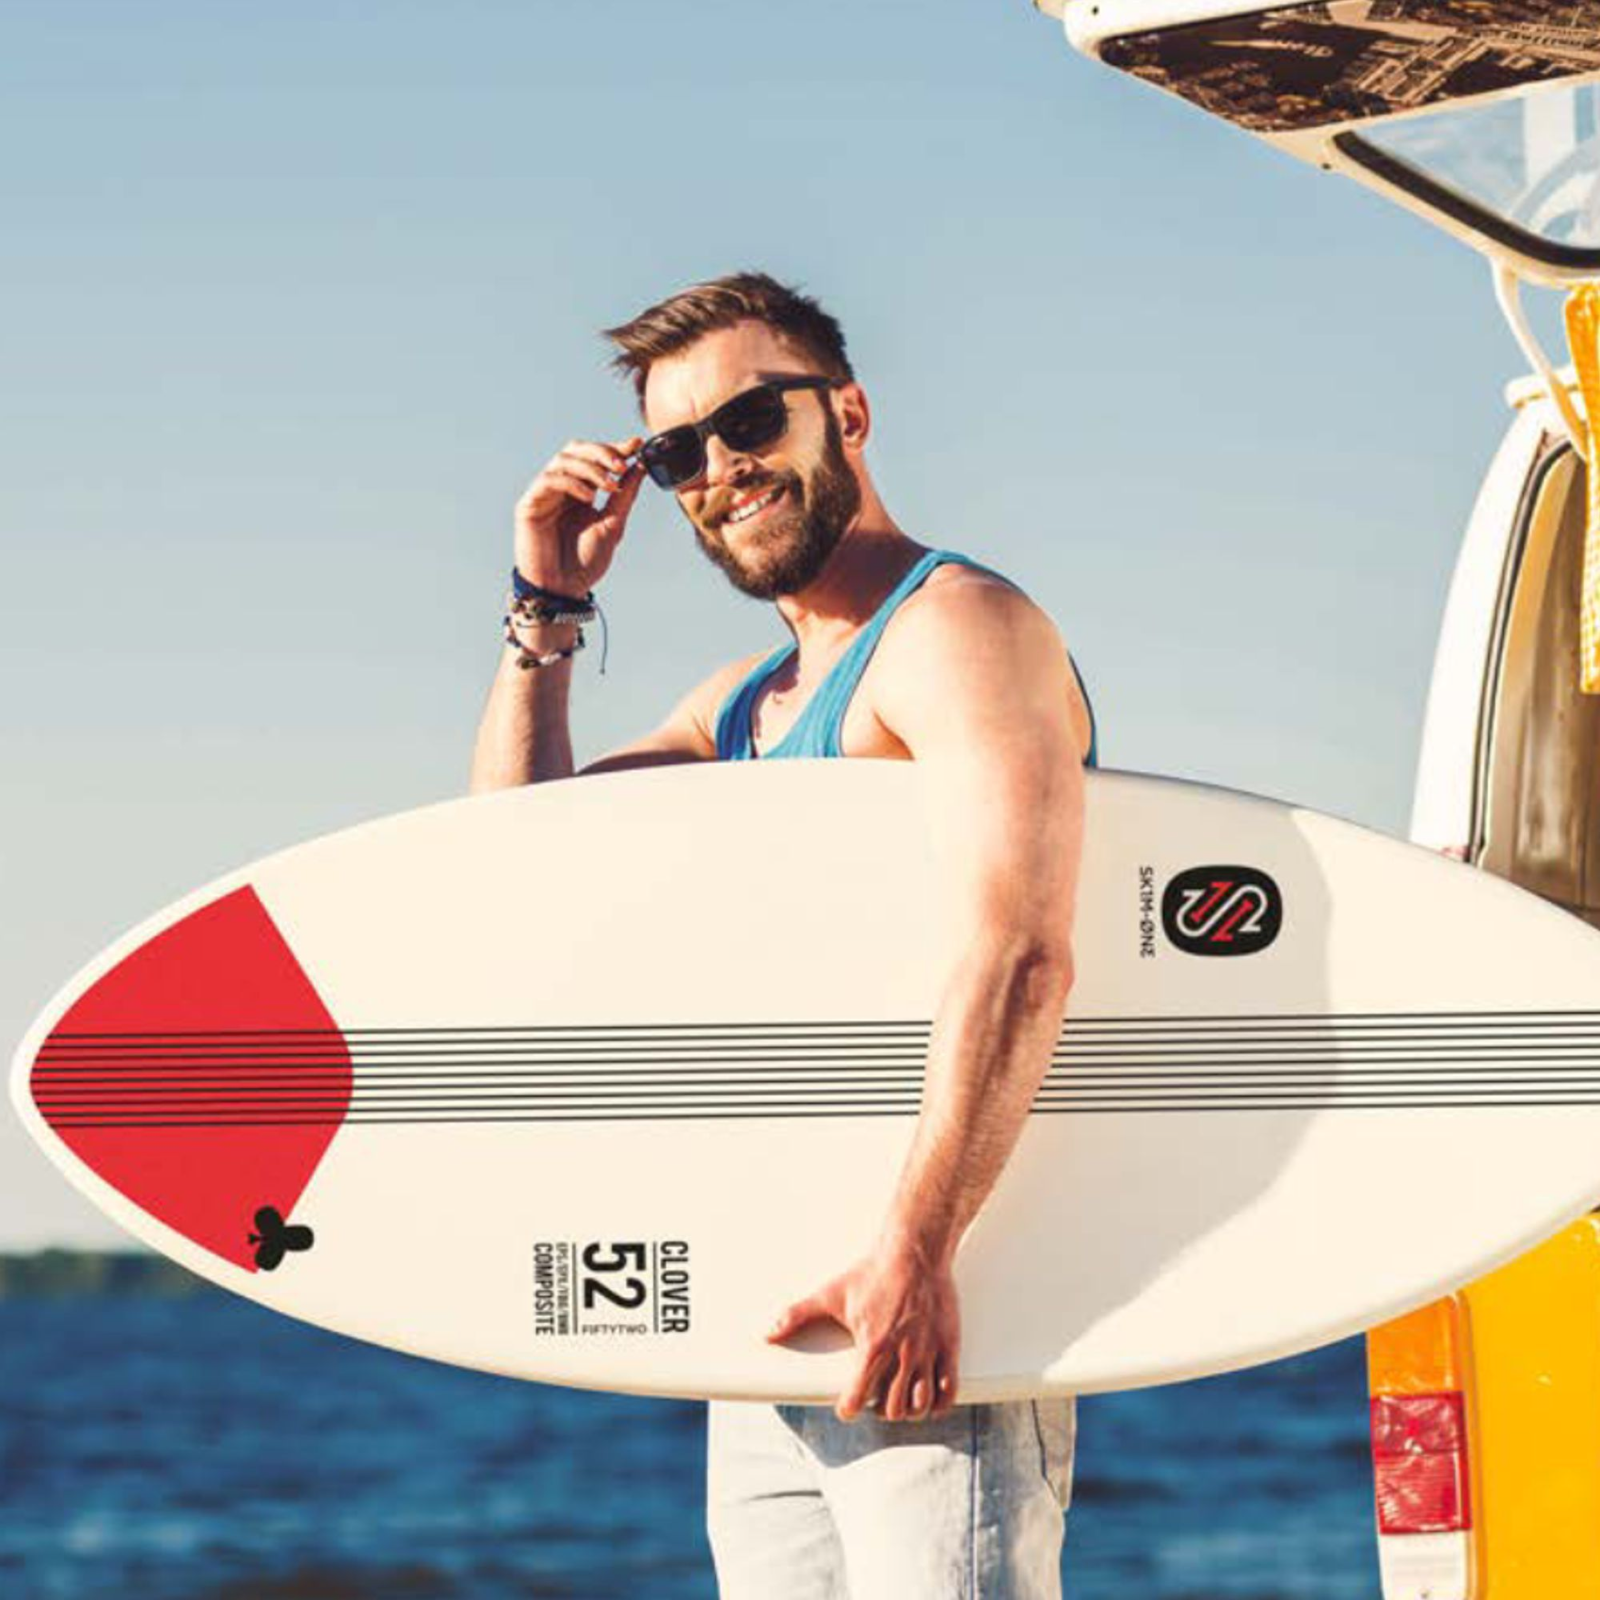 To the Skimboard online Shop